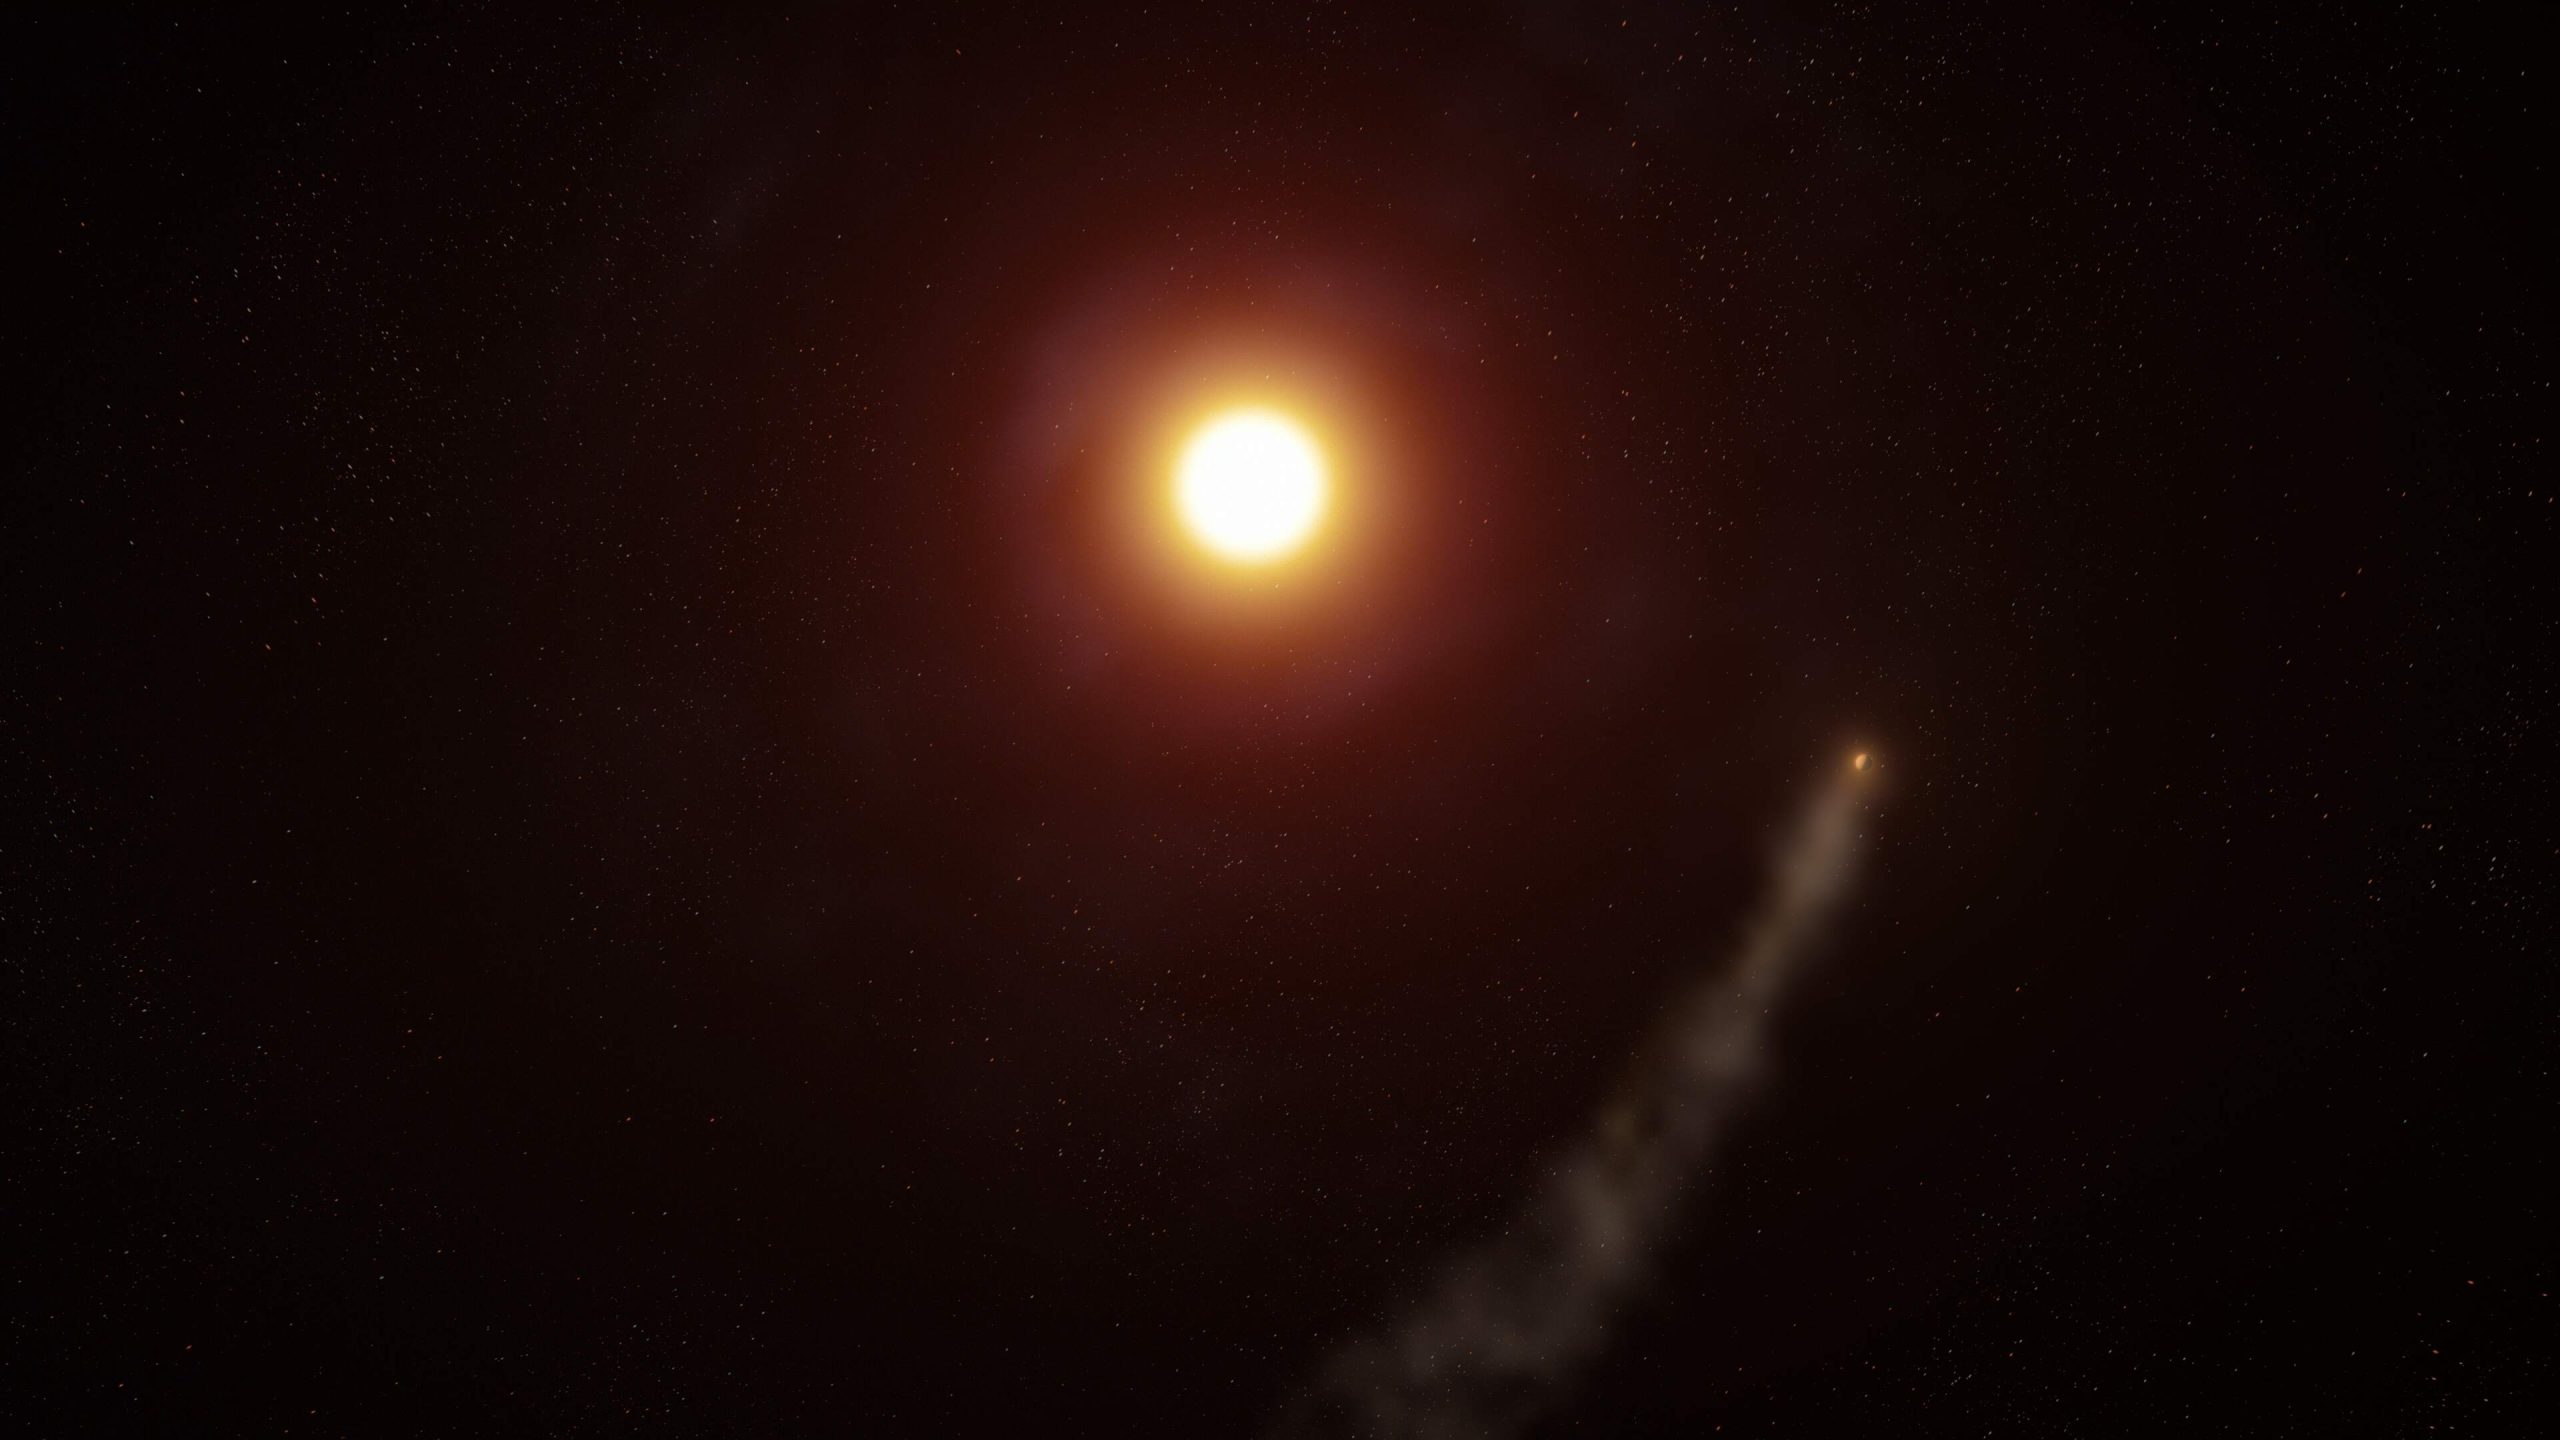 WASP-69b: New Images Reveal Exoplanet’s Comet-Like Tail is Surprisingly Longer Than Previously Observed